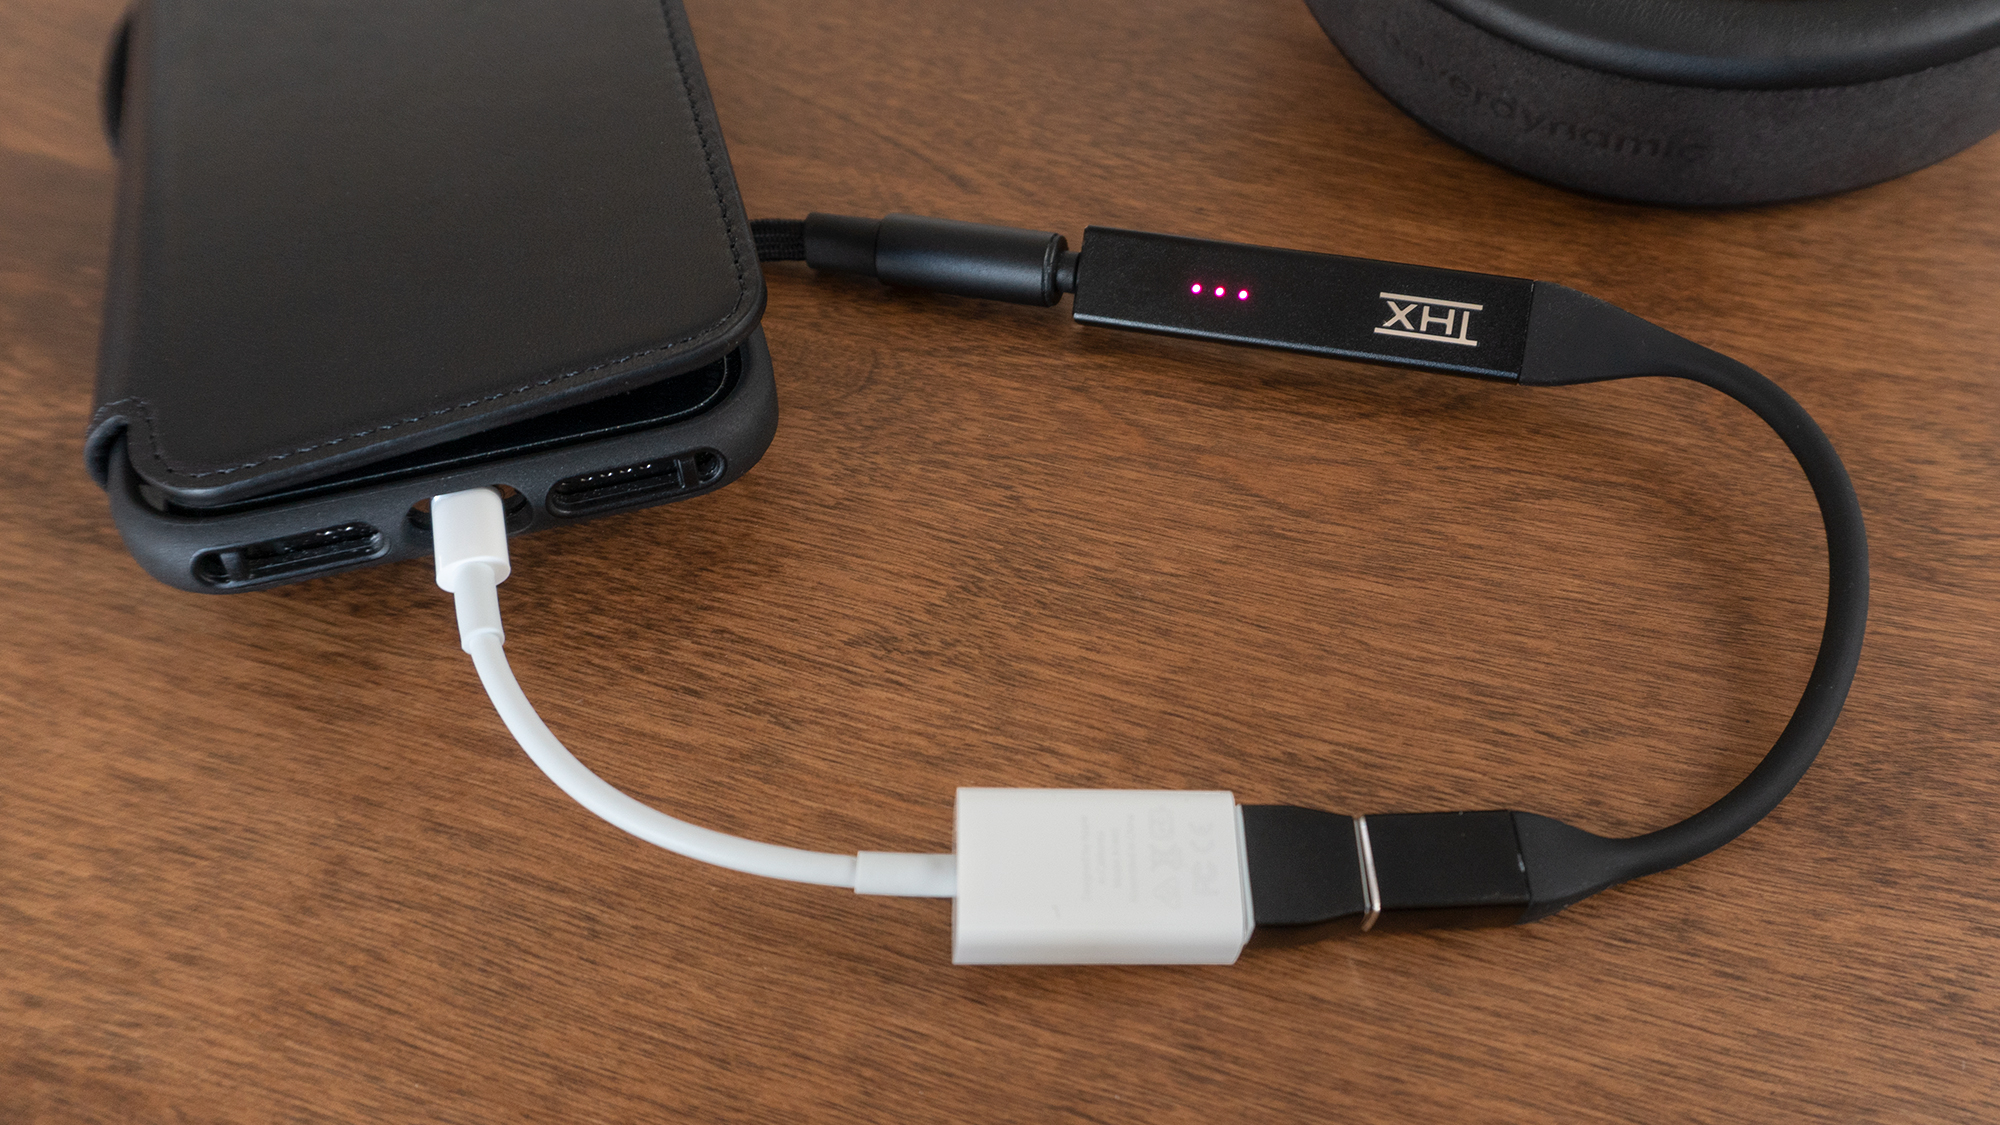 You'll also need Apple's Lightning to USB Camera Adaptor to connect the THX Onyx to an iPhone's Lightning port. (Photo: Andrew Liszewski/Gizmodo)